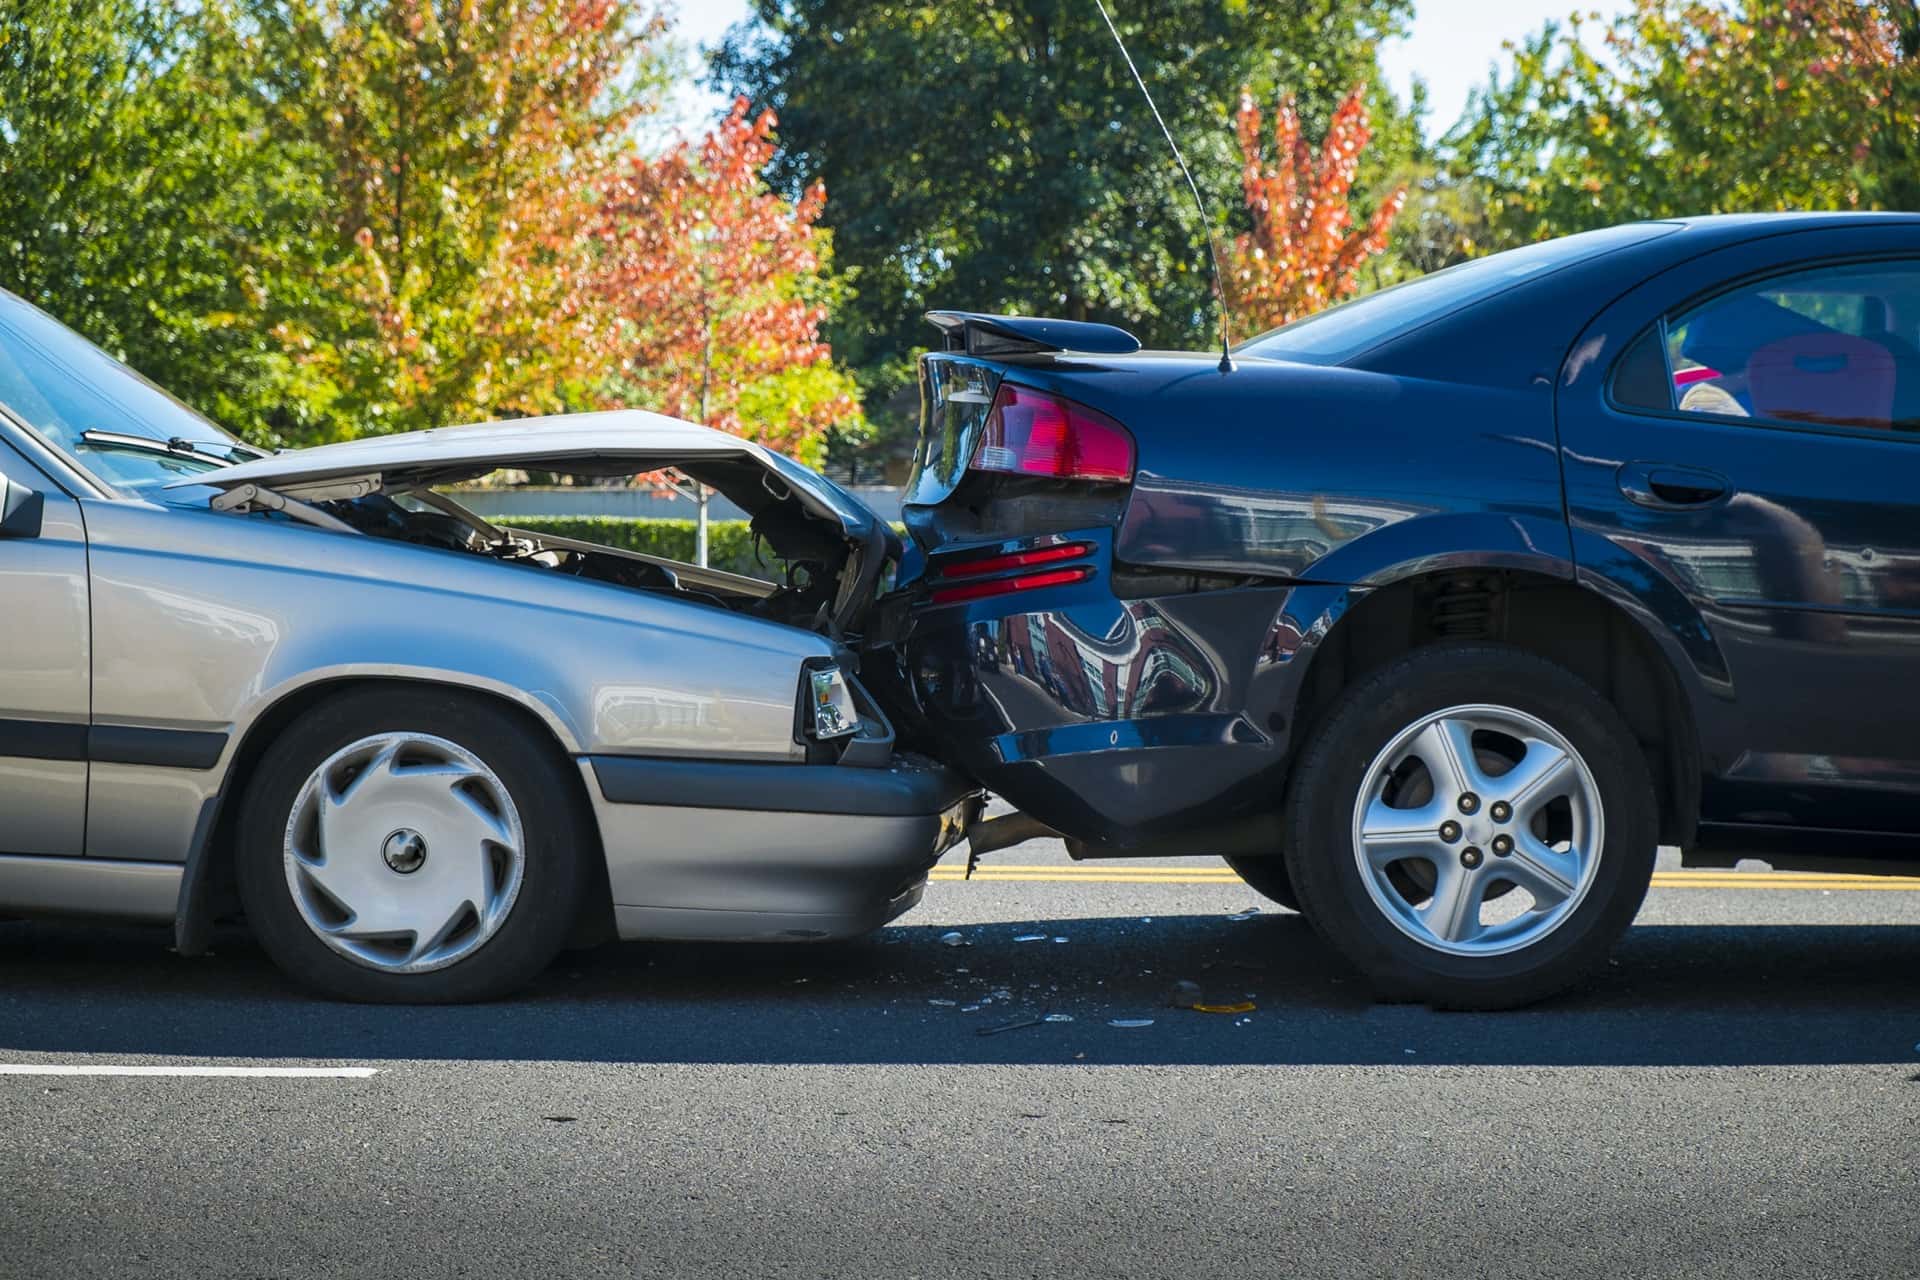 The Five Questions You Need to Ask Before Hiring an Auto Accident Attorney